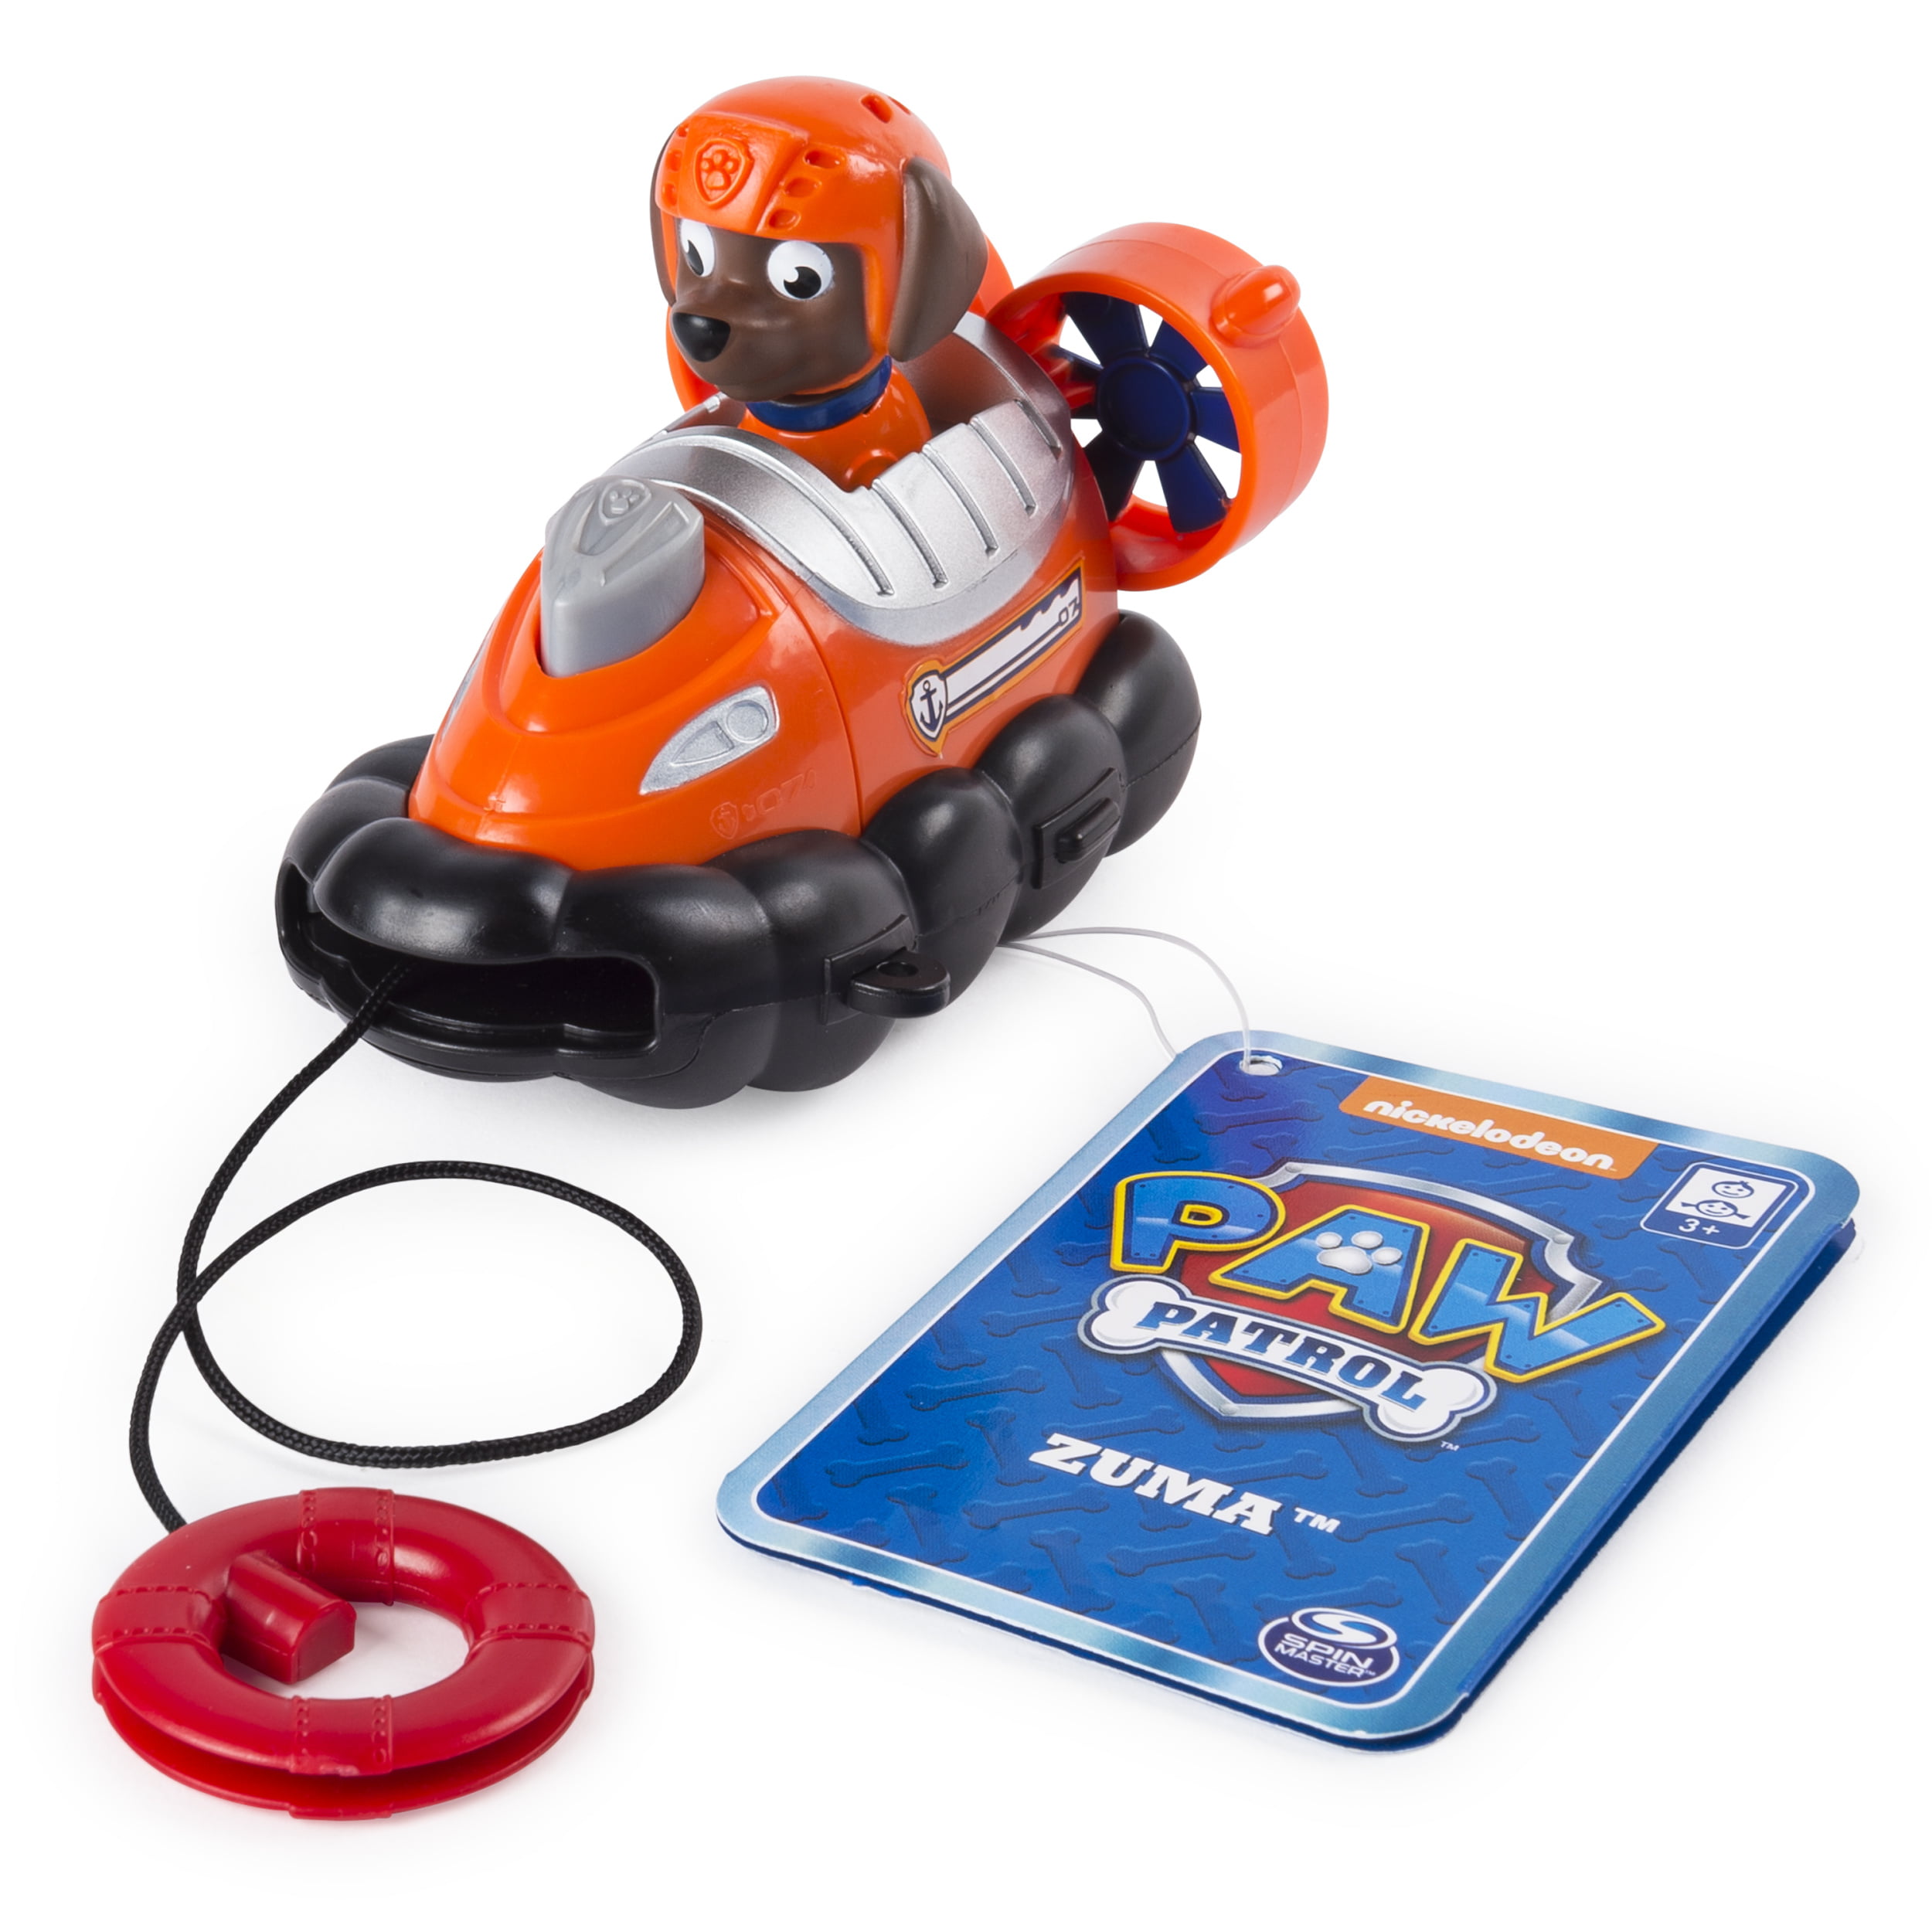 PAW Patrol, Zuma's Hovercraft Vehicle with Collectible Figure, for 